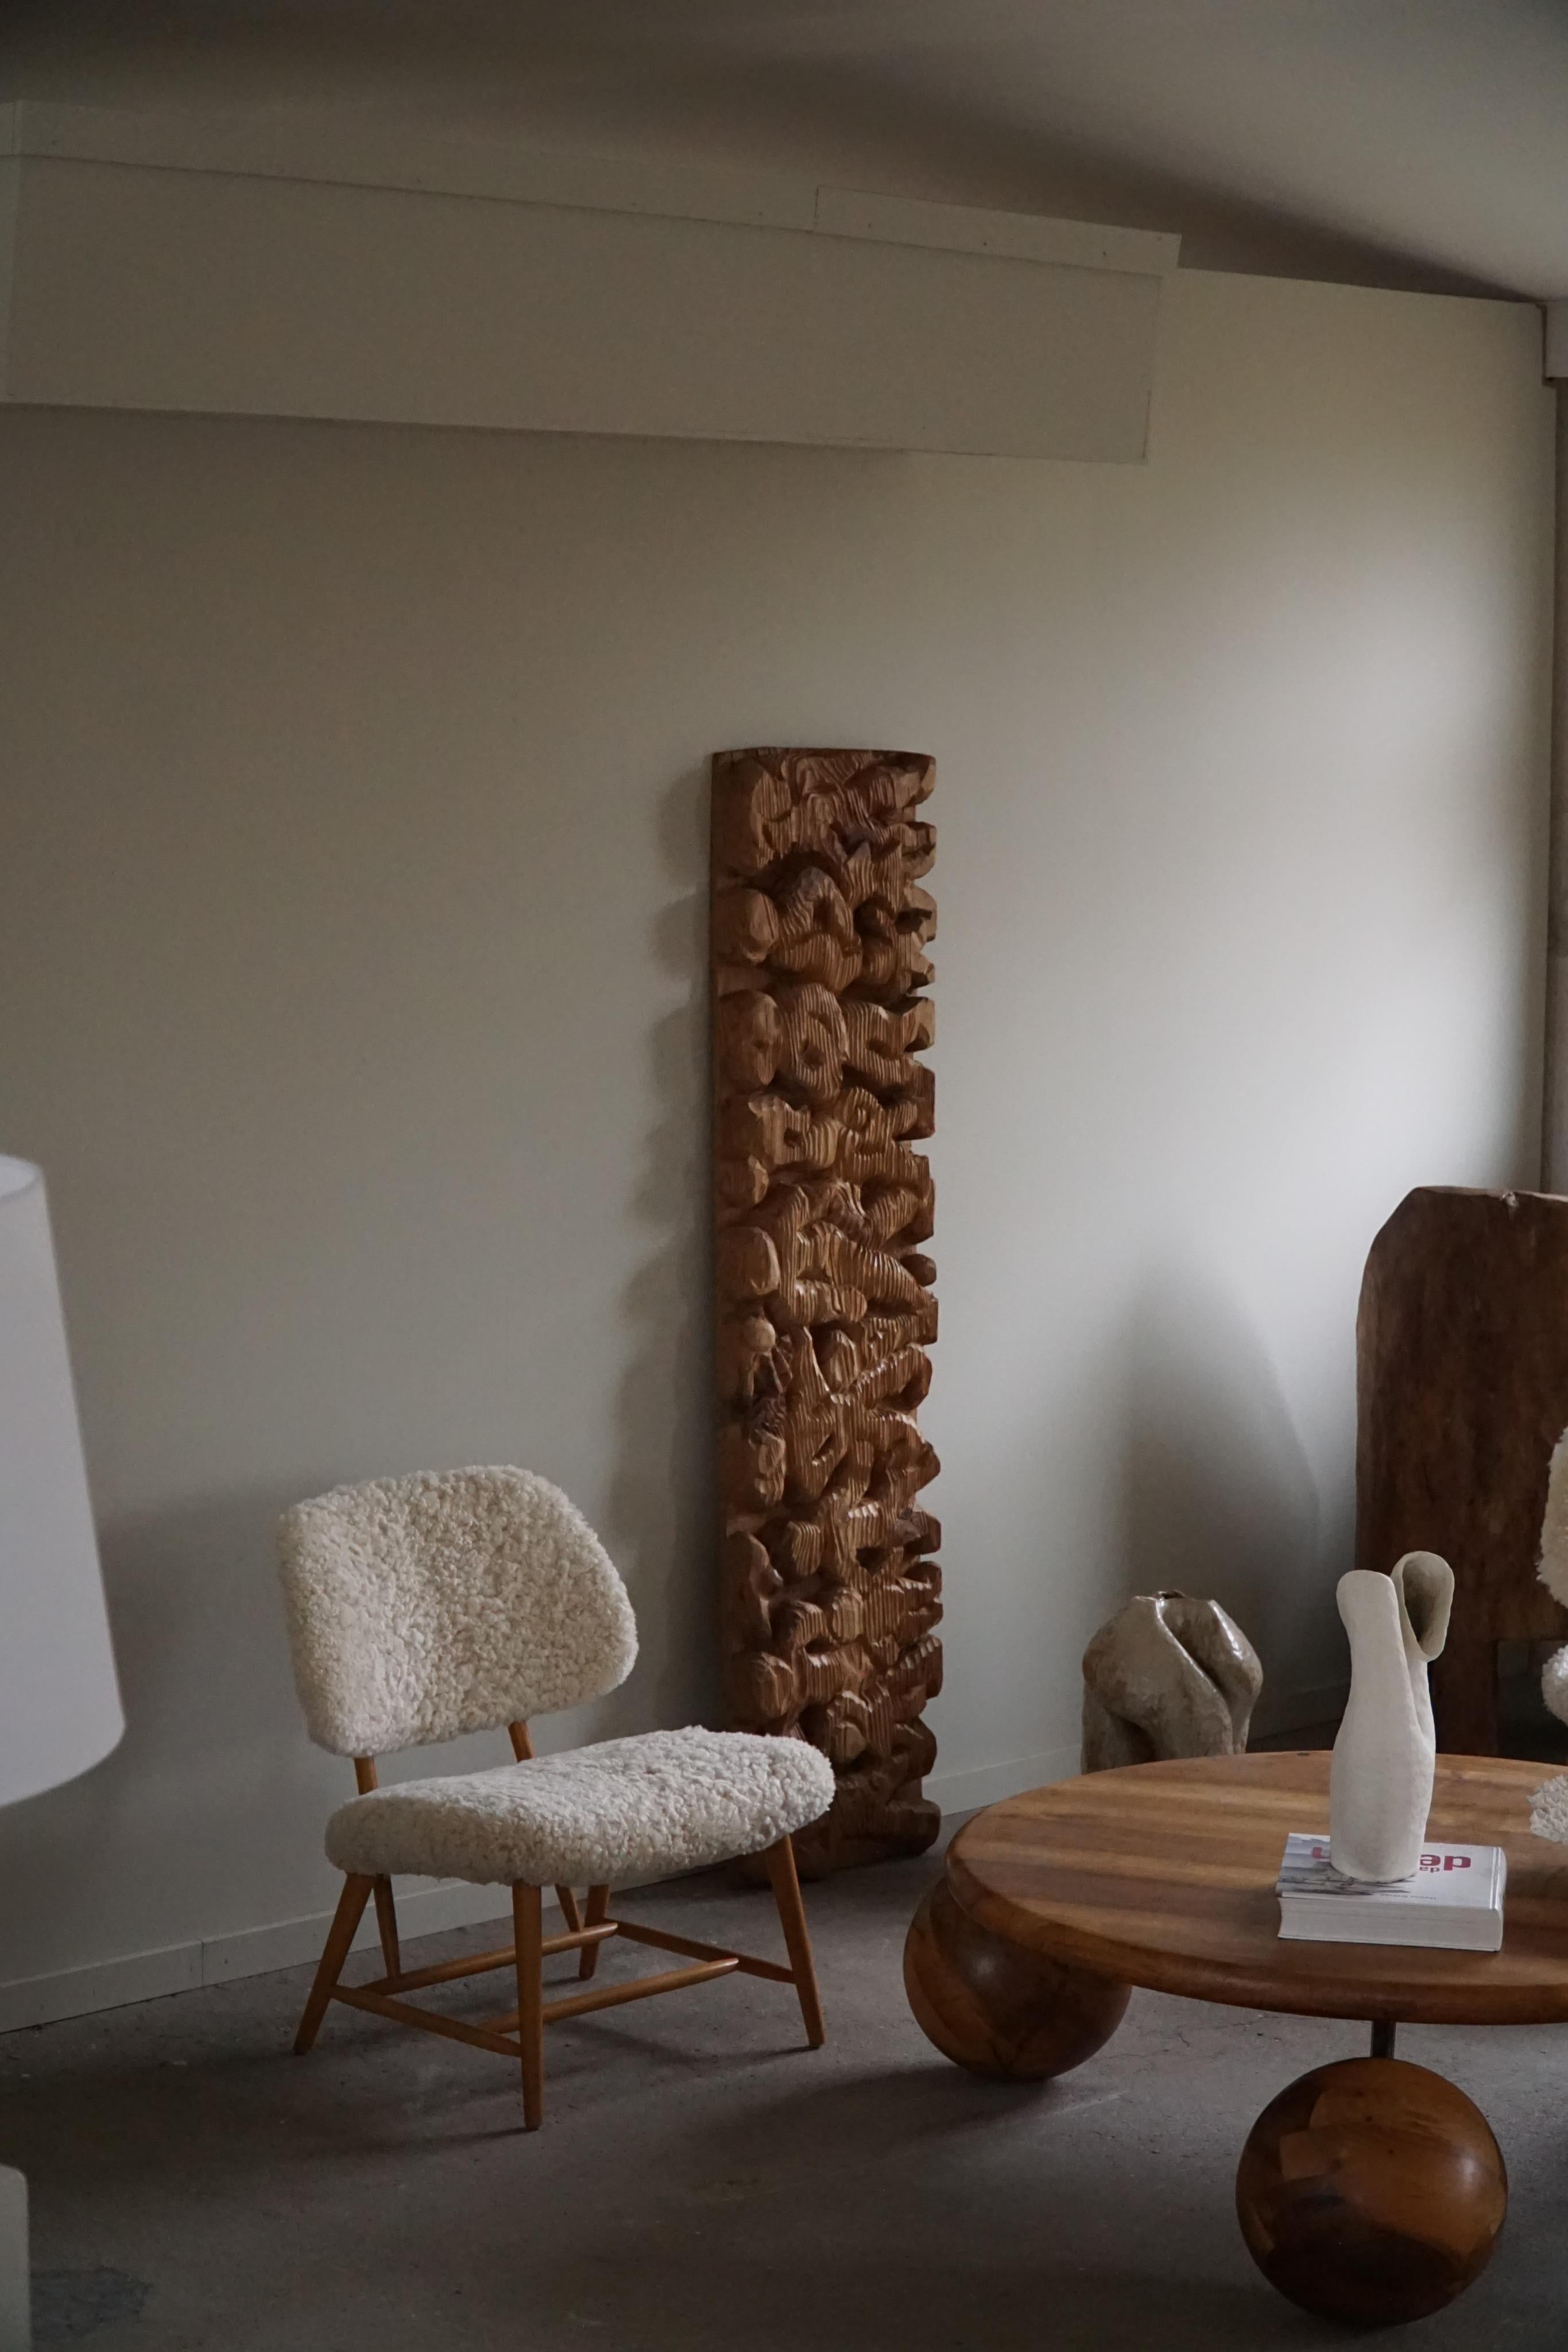 A fine unique wooden sculptural wall decoration. Hand Carved motifs, made by a Danish Cabinetmaker in the 1970s. Nice texture and dimensions in this vintage piece, it can be used as an abstract figure when turning vertical and a more figurative